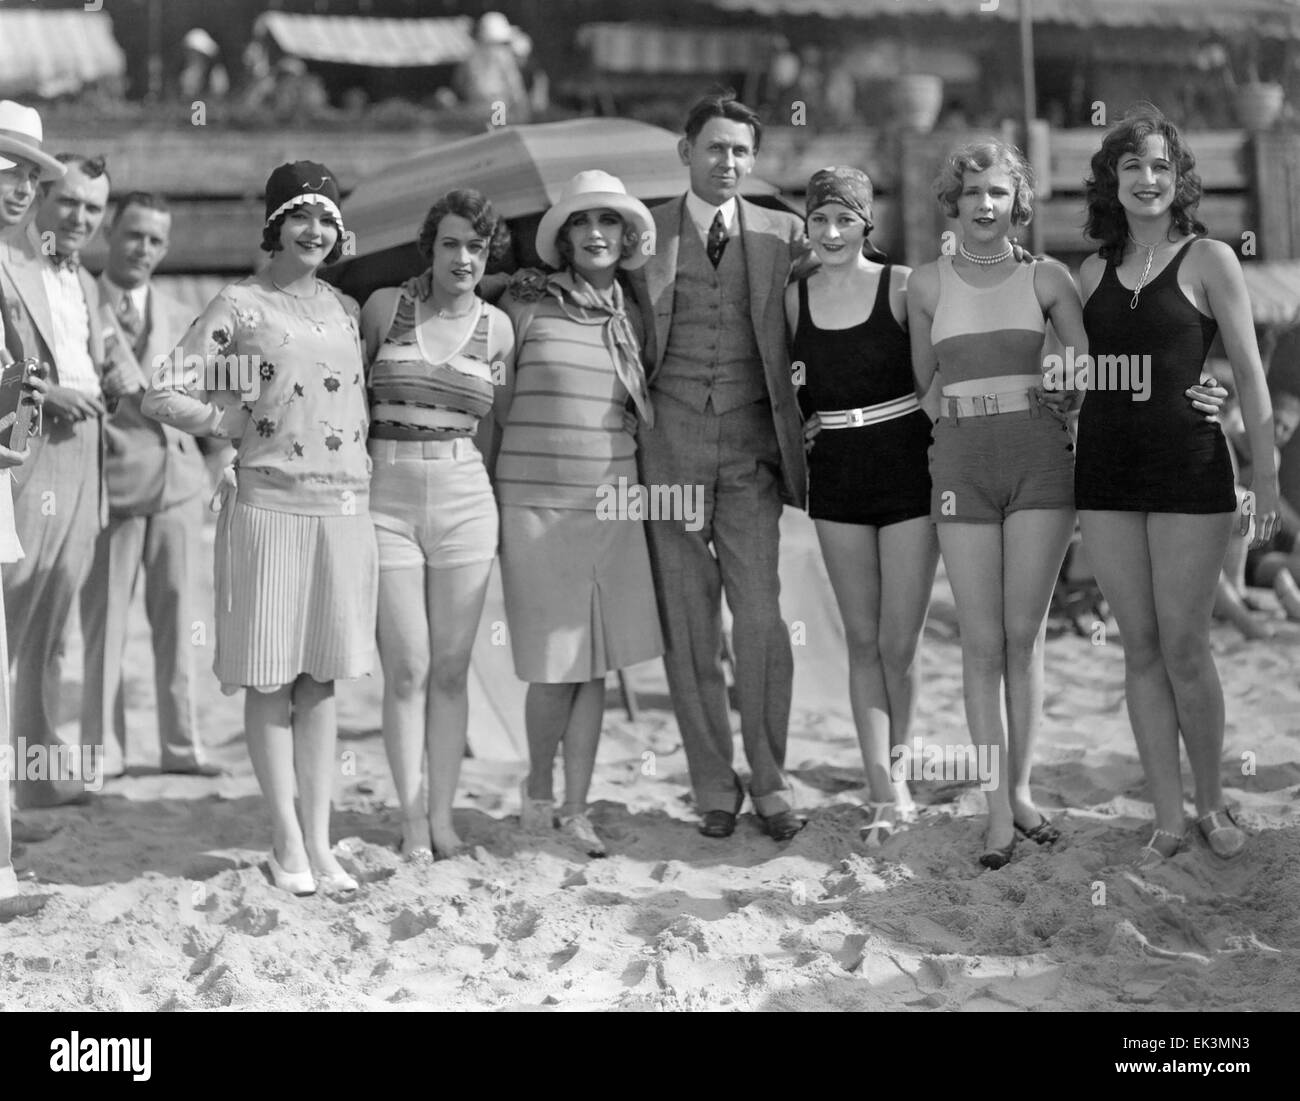 Carole Lombard, (third from left), Portrait on Beach, circa late 1920's Stock Photo